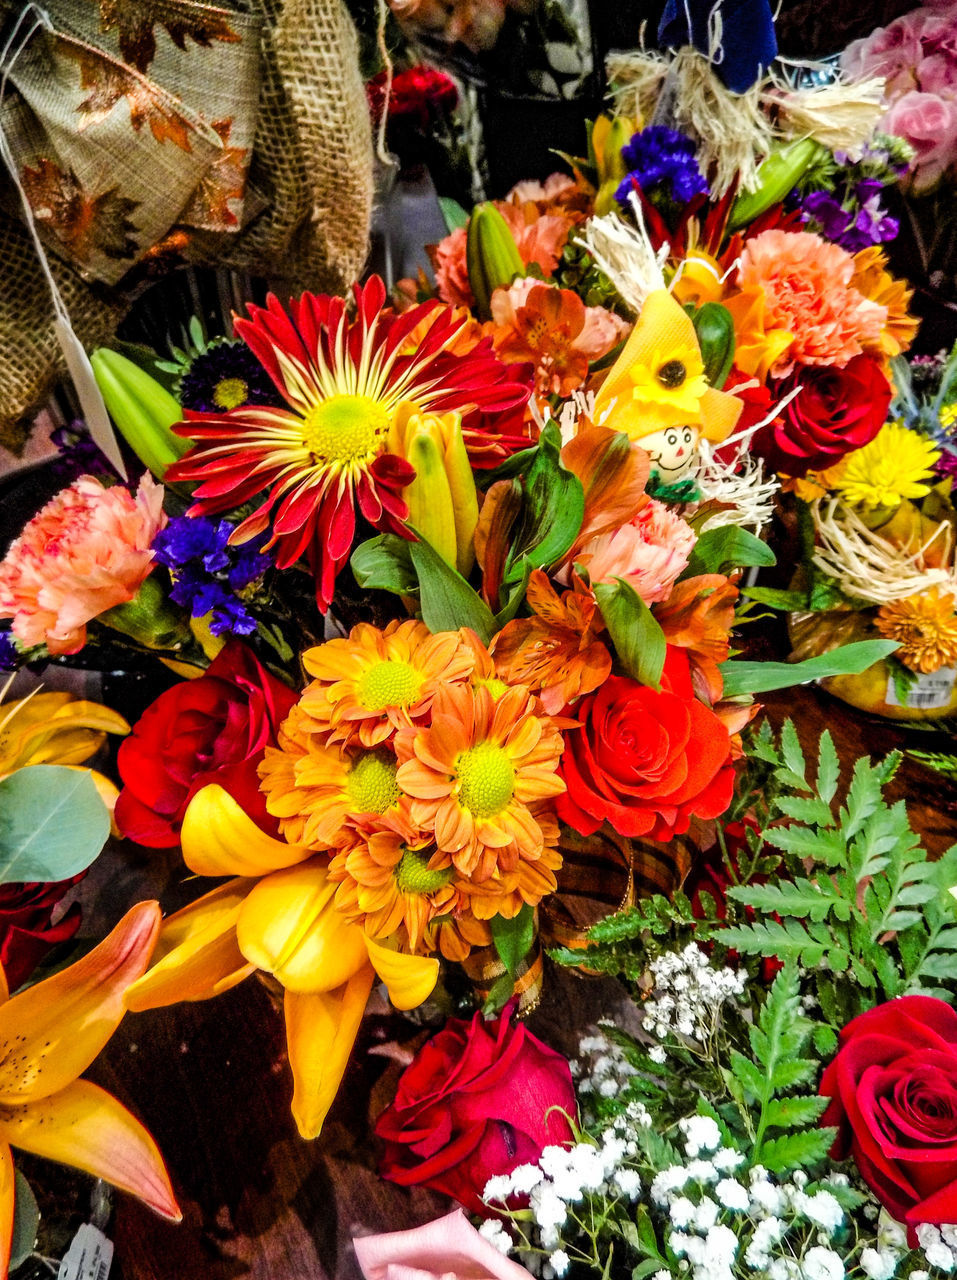 CLOSE-UP OF MULTI COLORED FLOWERS AT MARKET